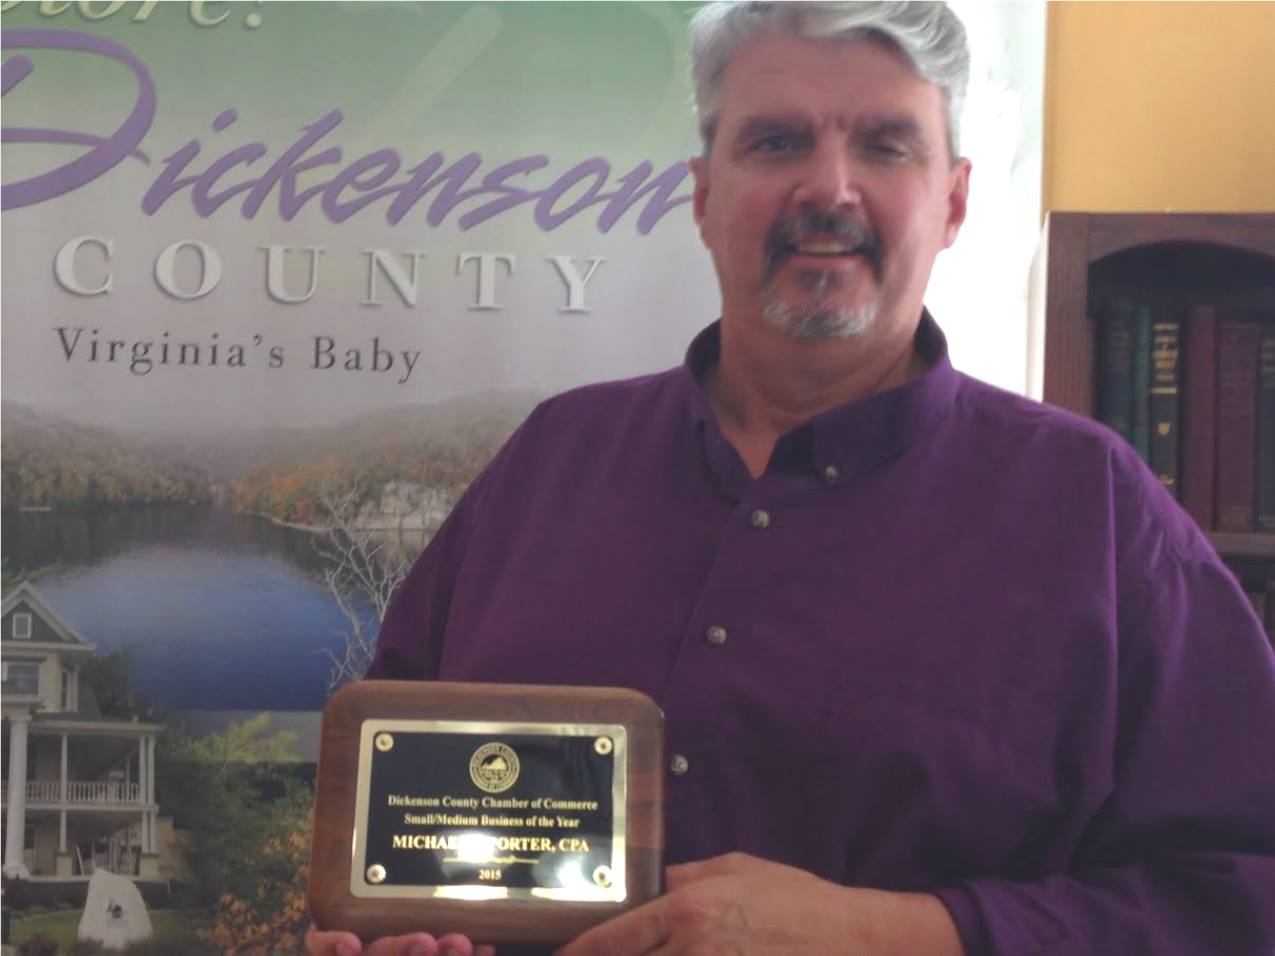 Dickenson County Chamber Small/Medium Business of the Year: Michael Porter, CPA